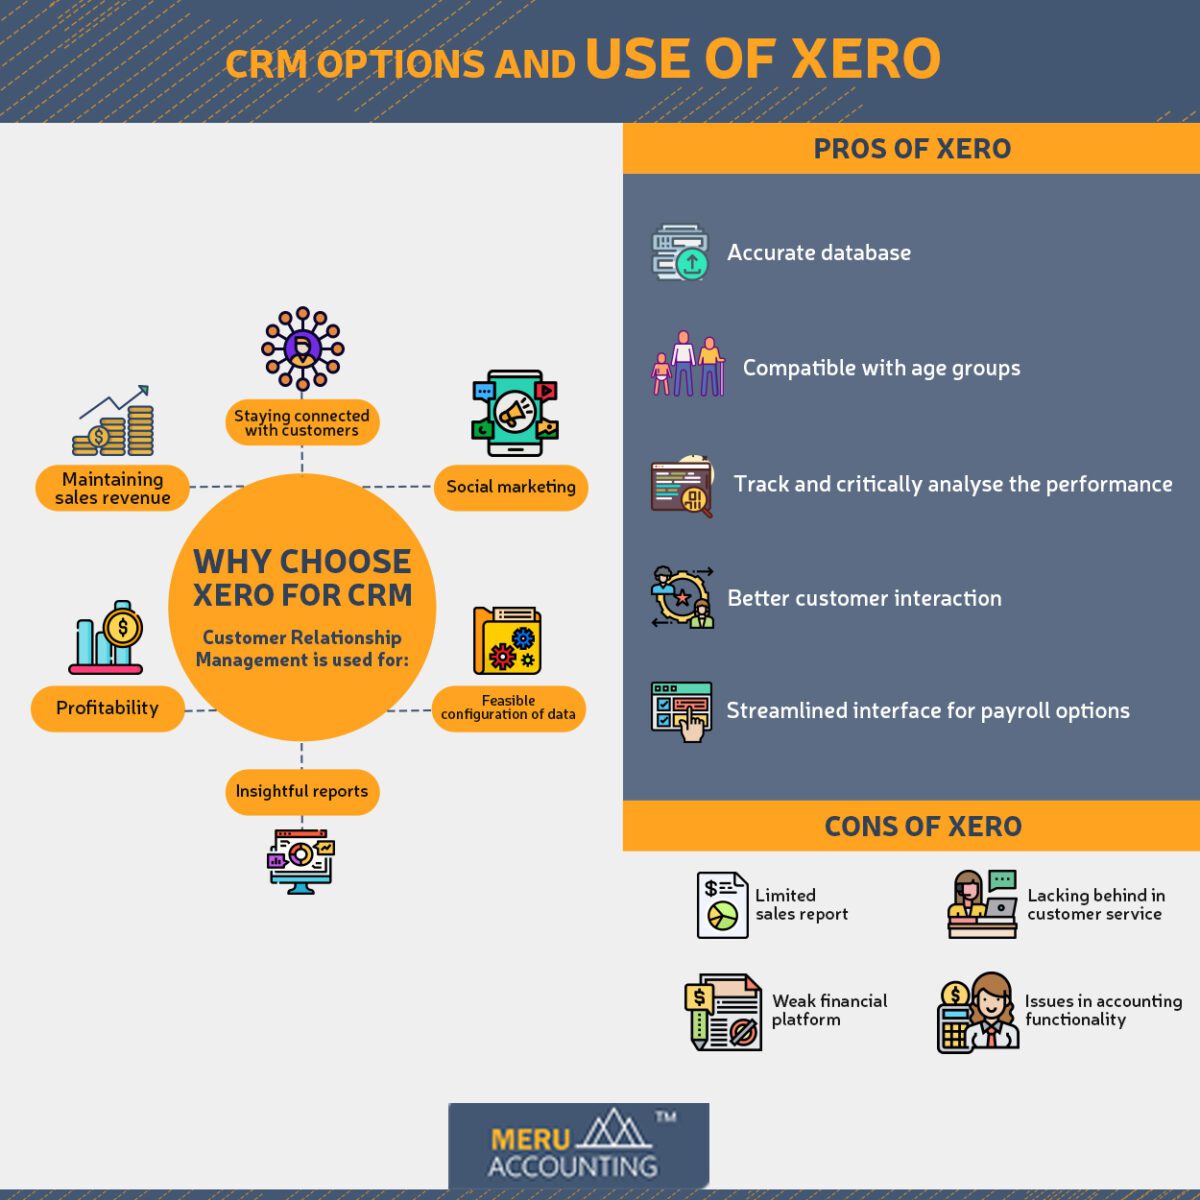 CRM options and use of Xero